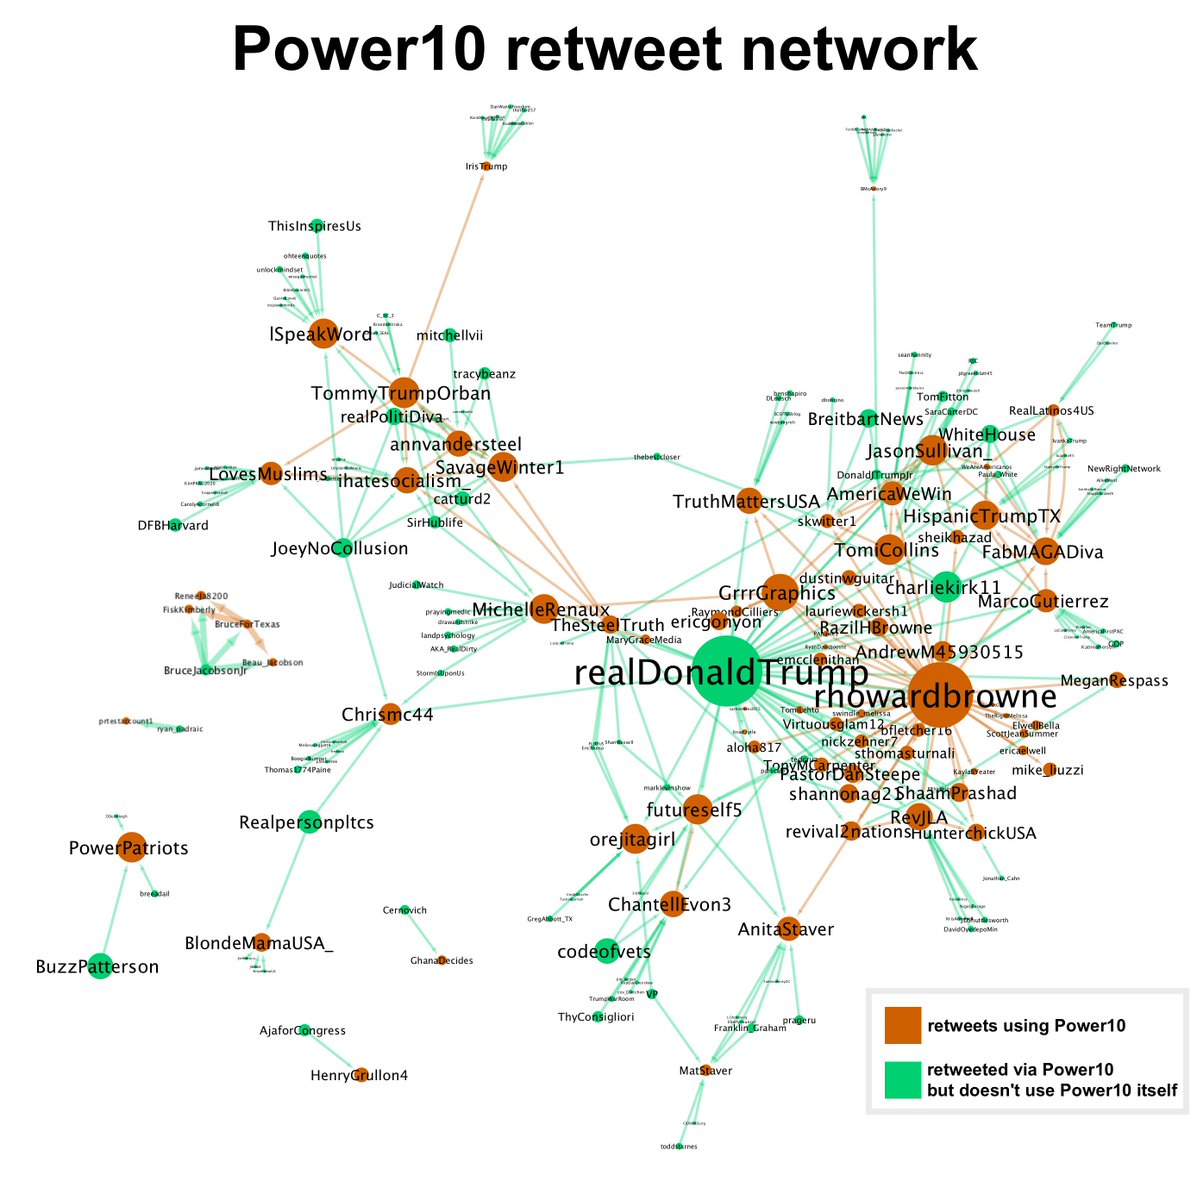 Retweet network for the Power10 accounts and the accounts they amplify. The main network contains many  #MAGA frequent flyers, with a smaller separate network related to  @BruceForTexas's Senate campaign also visible.  @GhanaDecides appears to be a dormant  @Cernovich retweet bot.